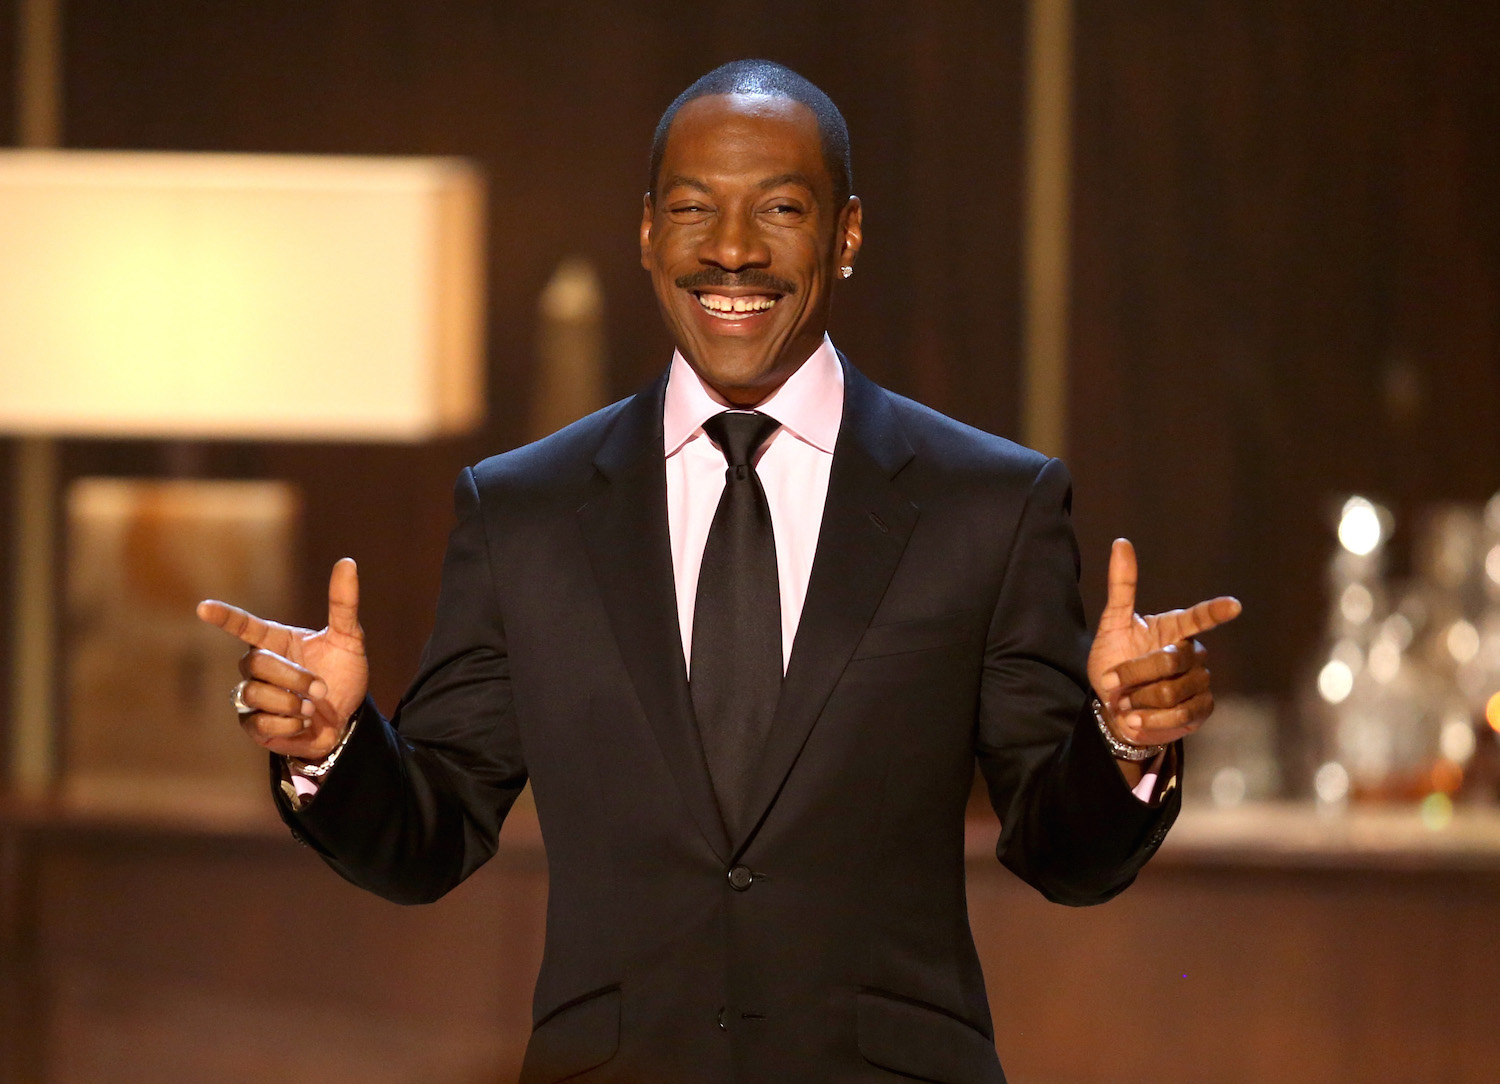 Know Actor Eddie Murphy's Net Worth - Career, Salary, Personal Life, and More!